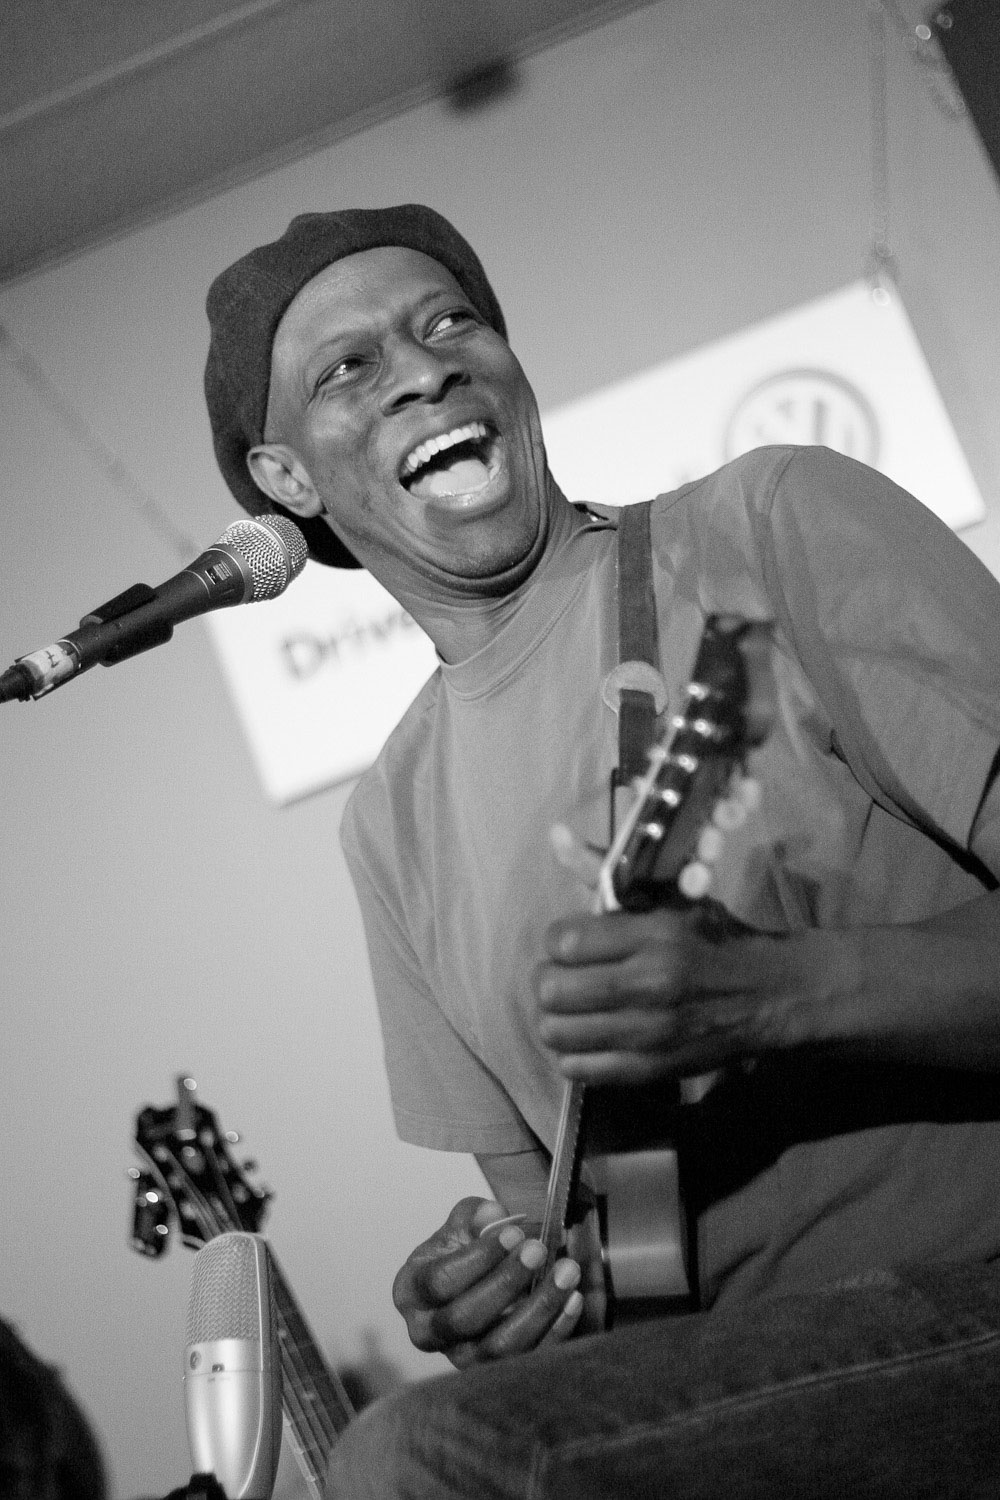 Keb' Mo', blues musician, sings and plays at KINK.fm 102